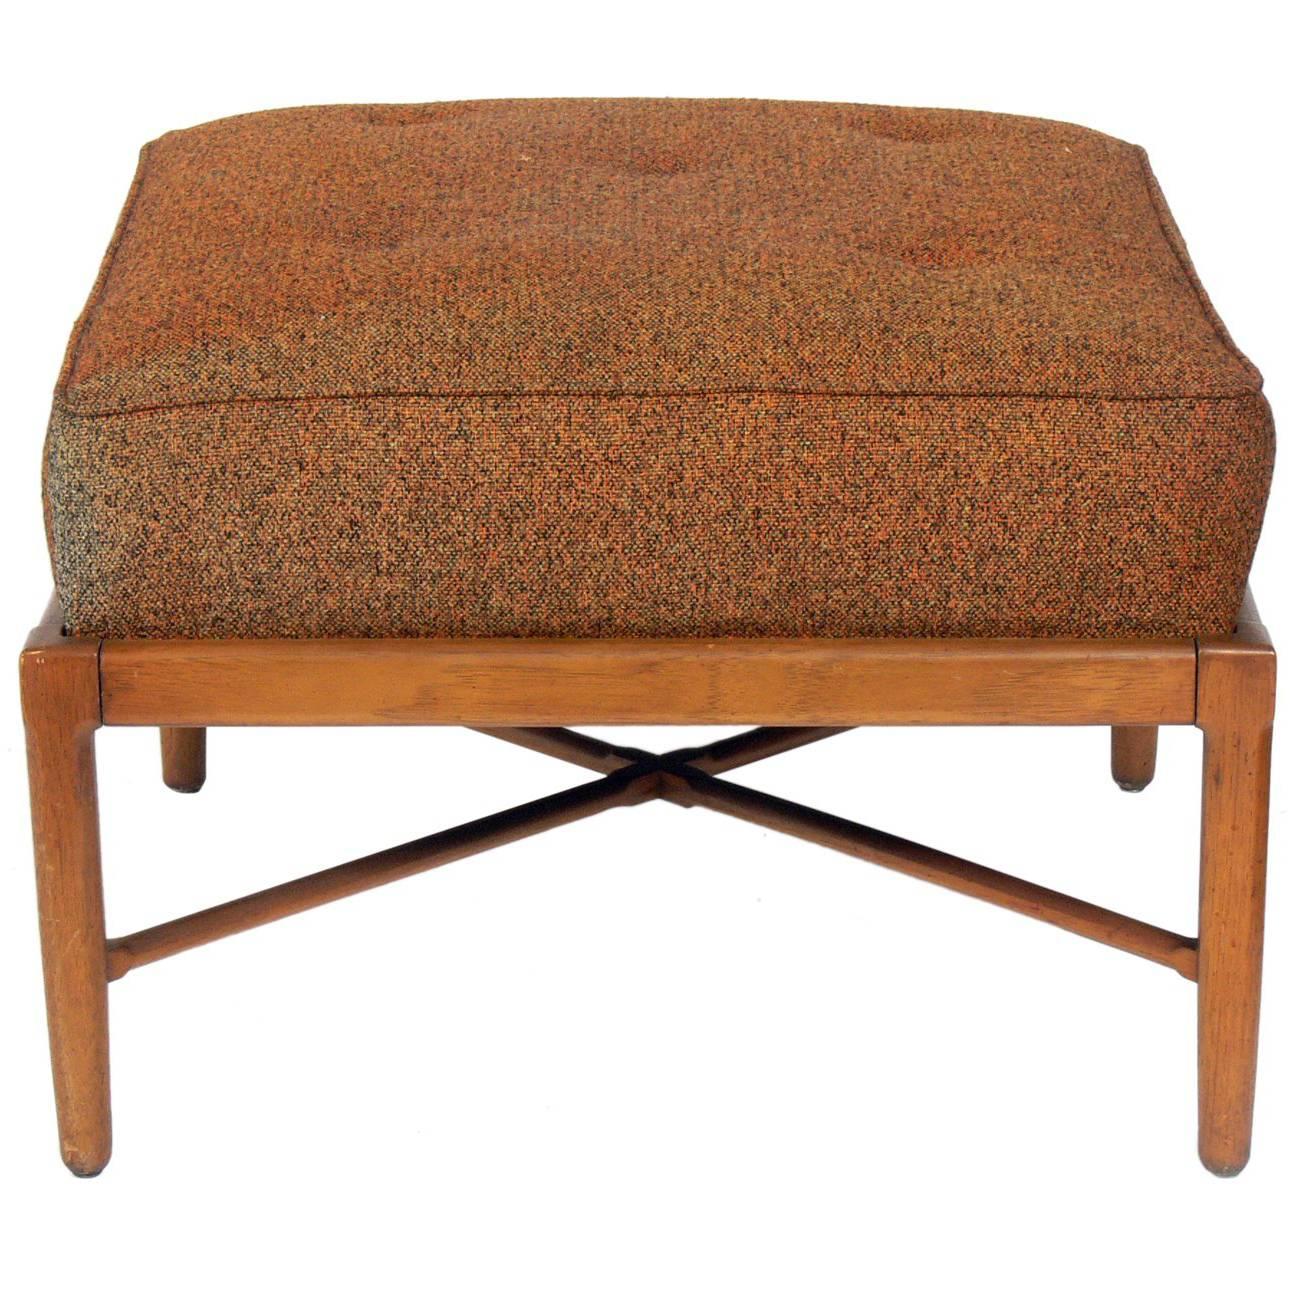 Large-Scale X-Based Ottoman or Stool by Lubberts and Mulder for Tomlinson